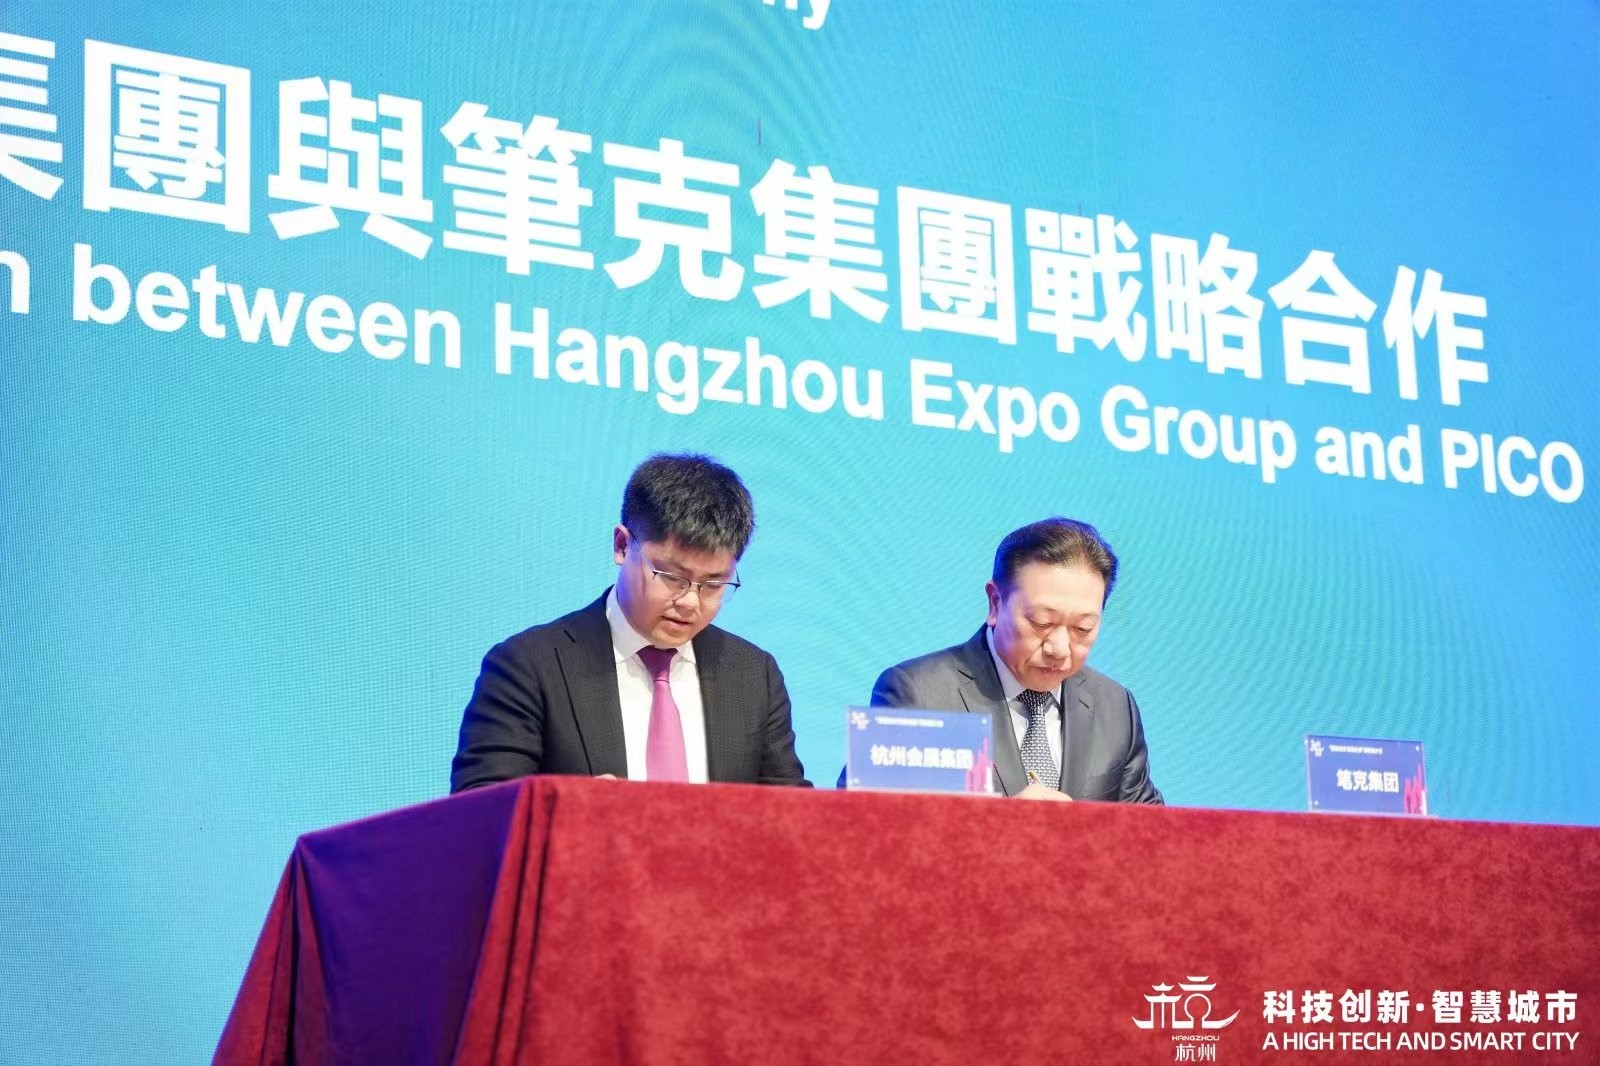 Pico and Hangzhou Expo Group form strategic alliance 3